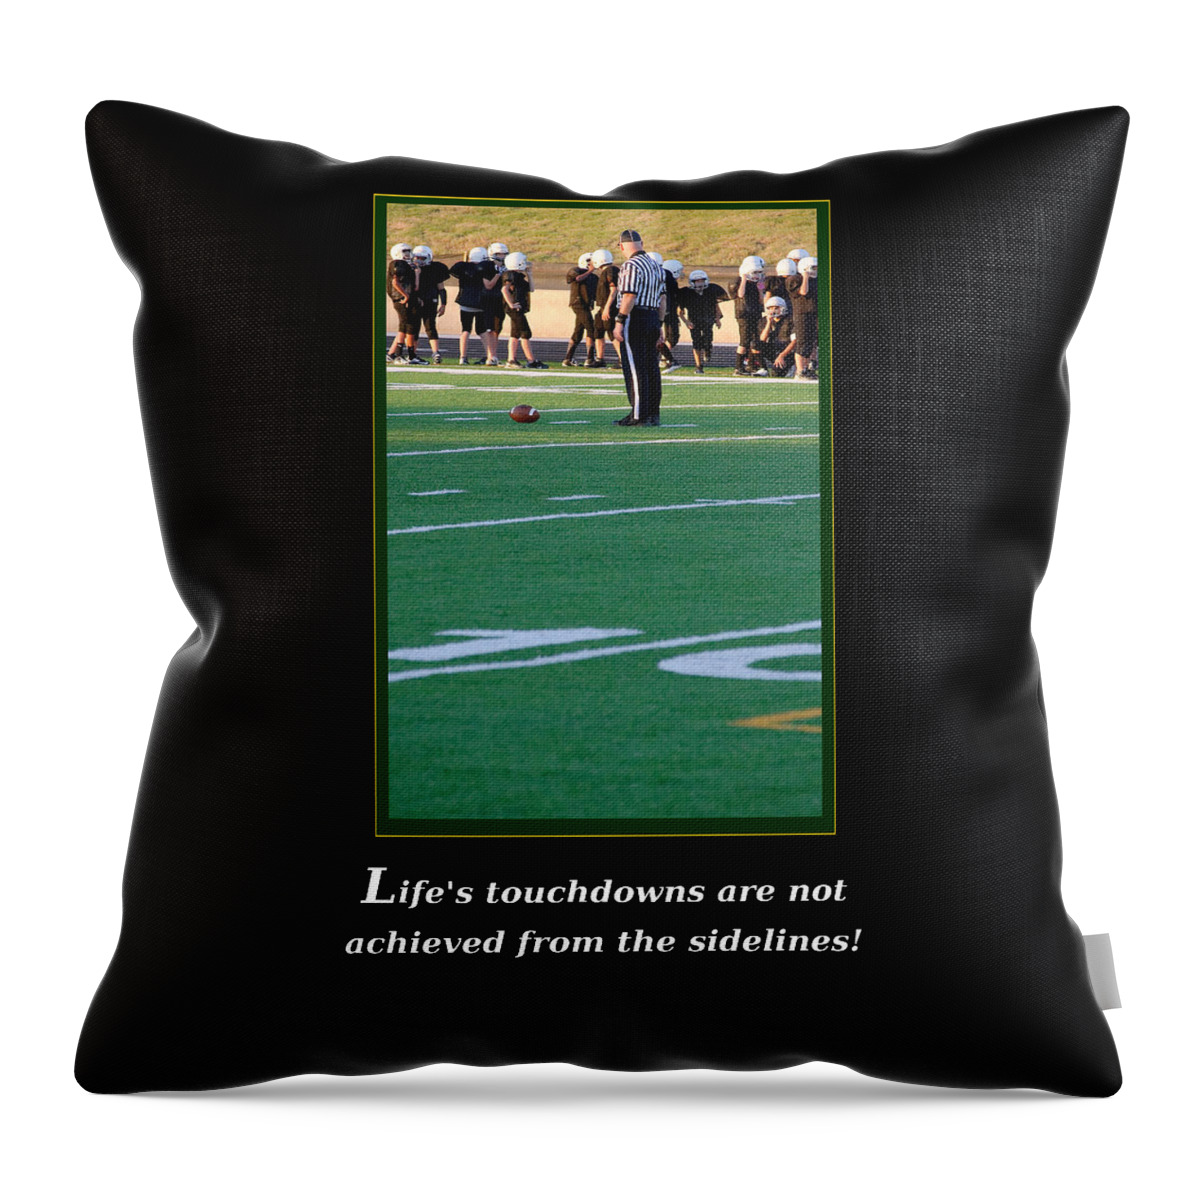 Texas Throw Pillow featuring the photograph Life's Touchdowns by Erich Grant